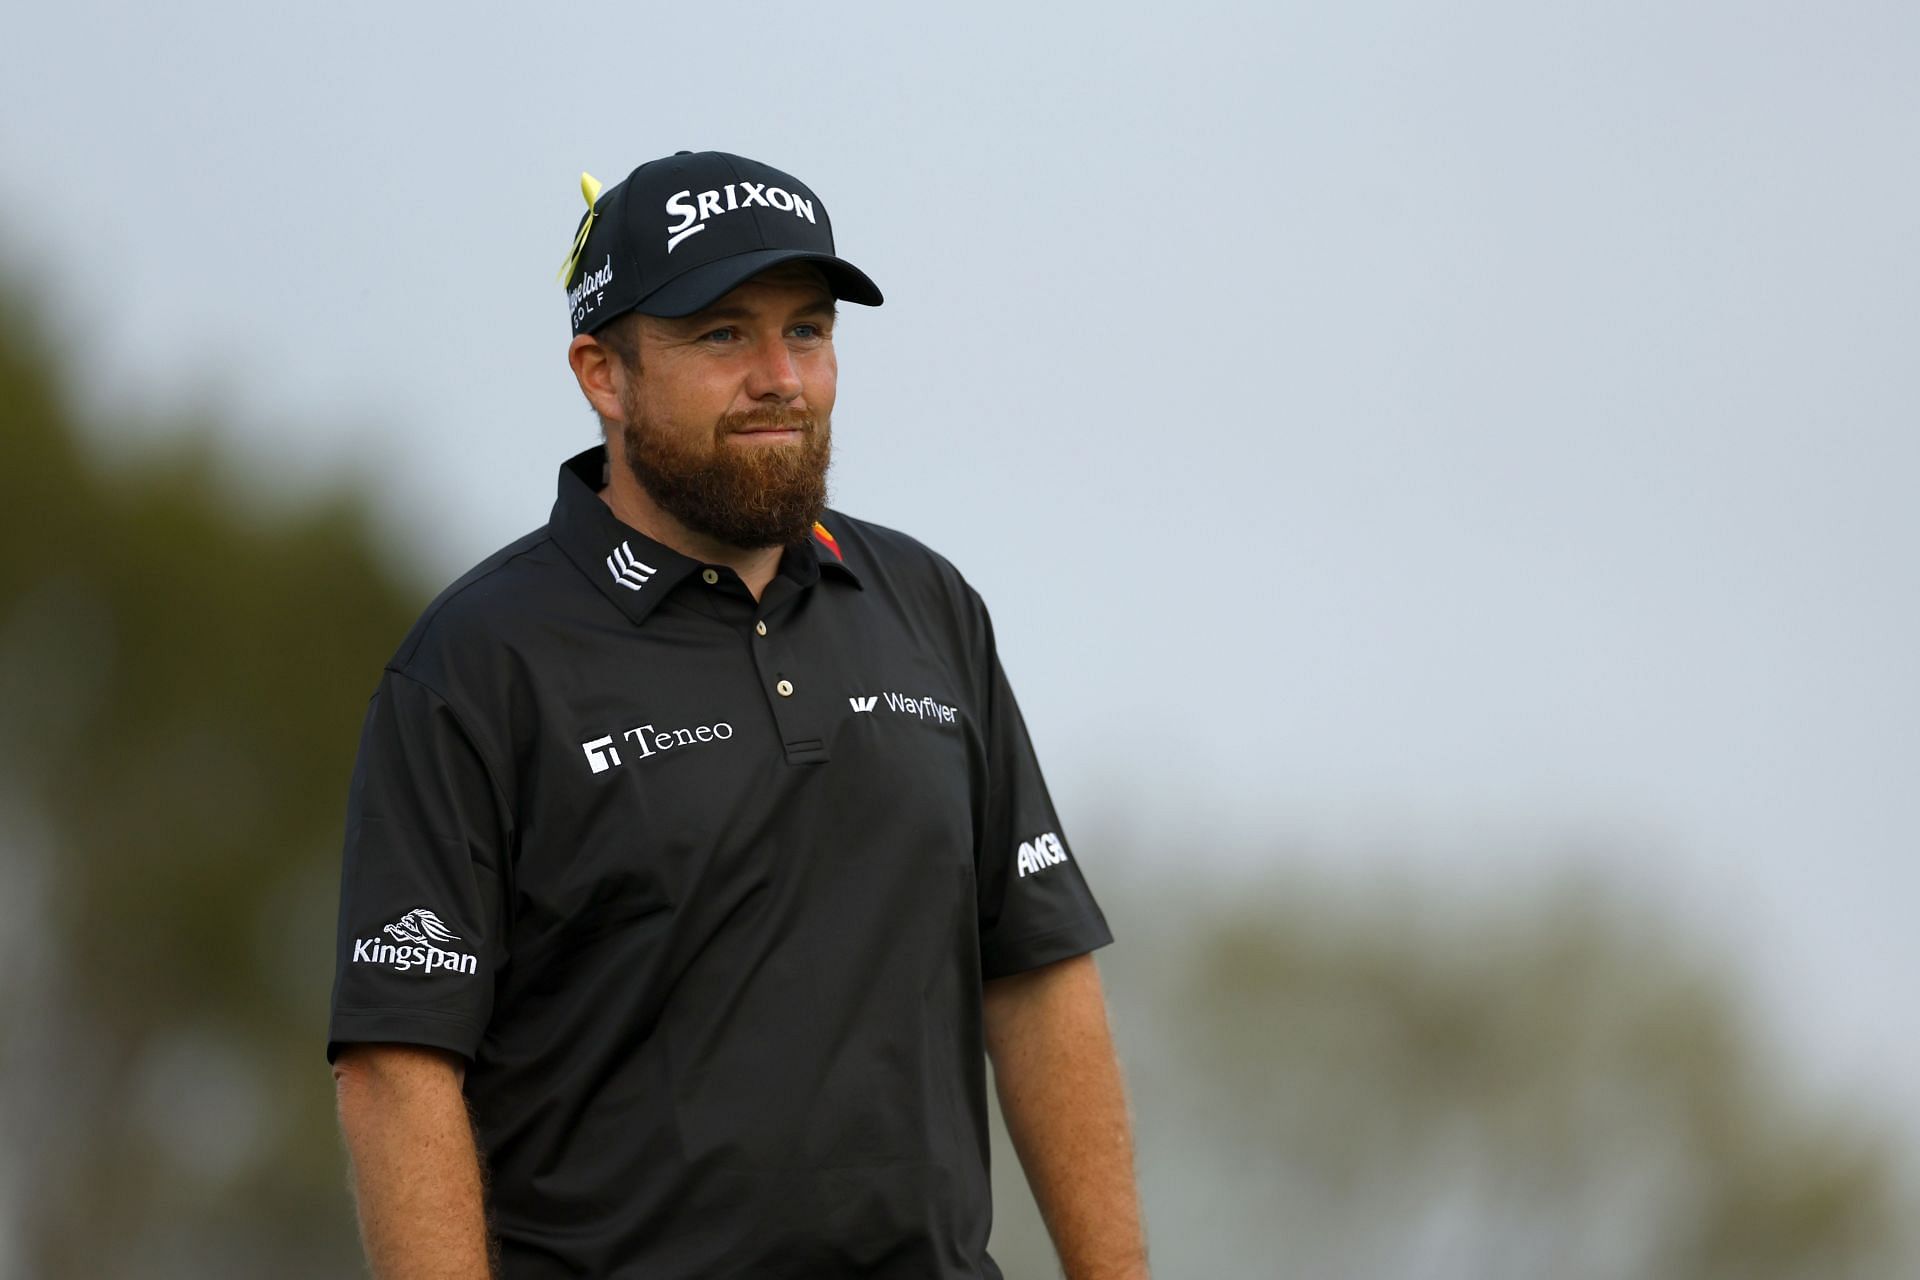 Shane Lowry during The Cognizant Classic in The Palm Beaches: Final Round